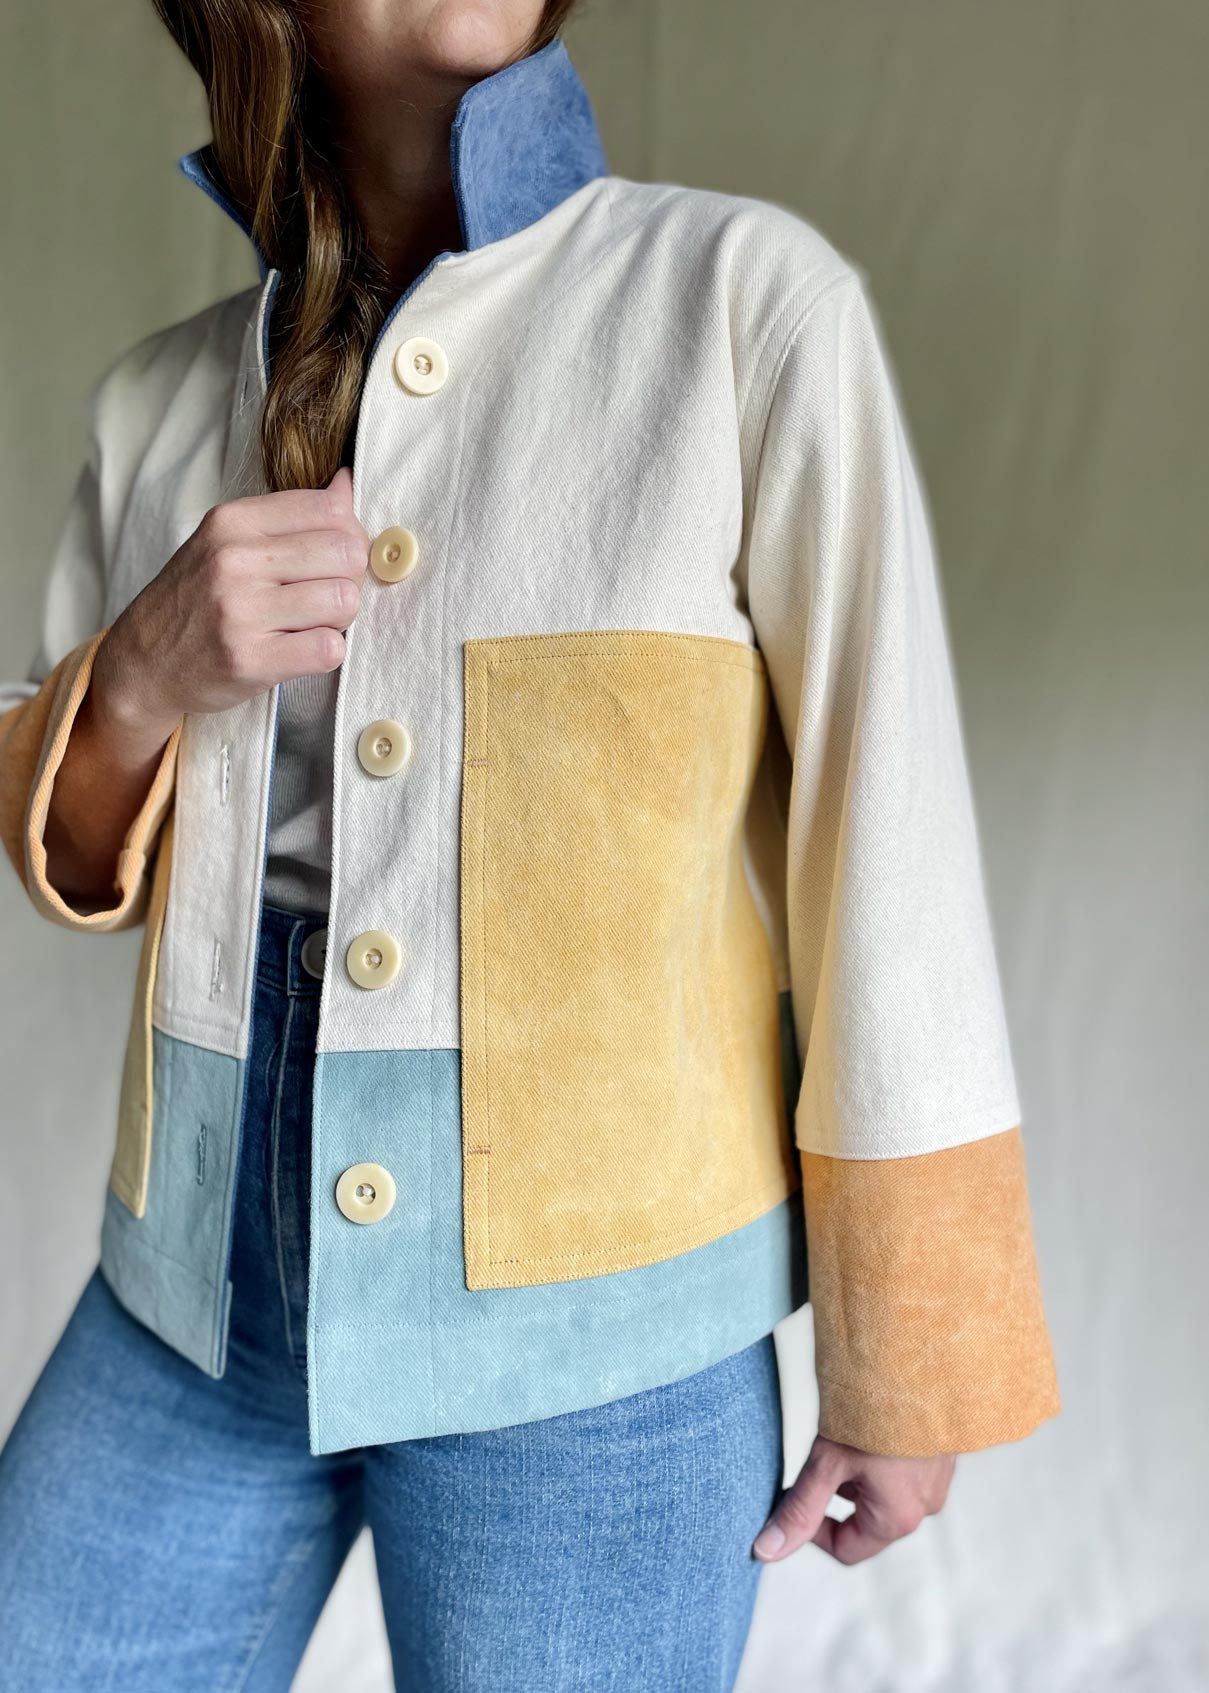 Made-to-order Color Block Jacket: Cream color body for Kim